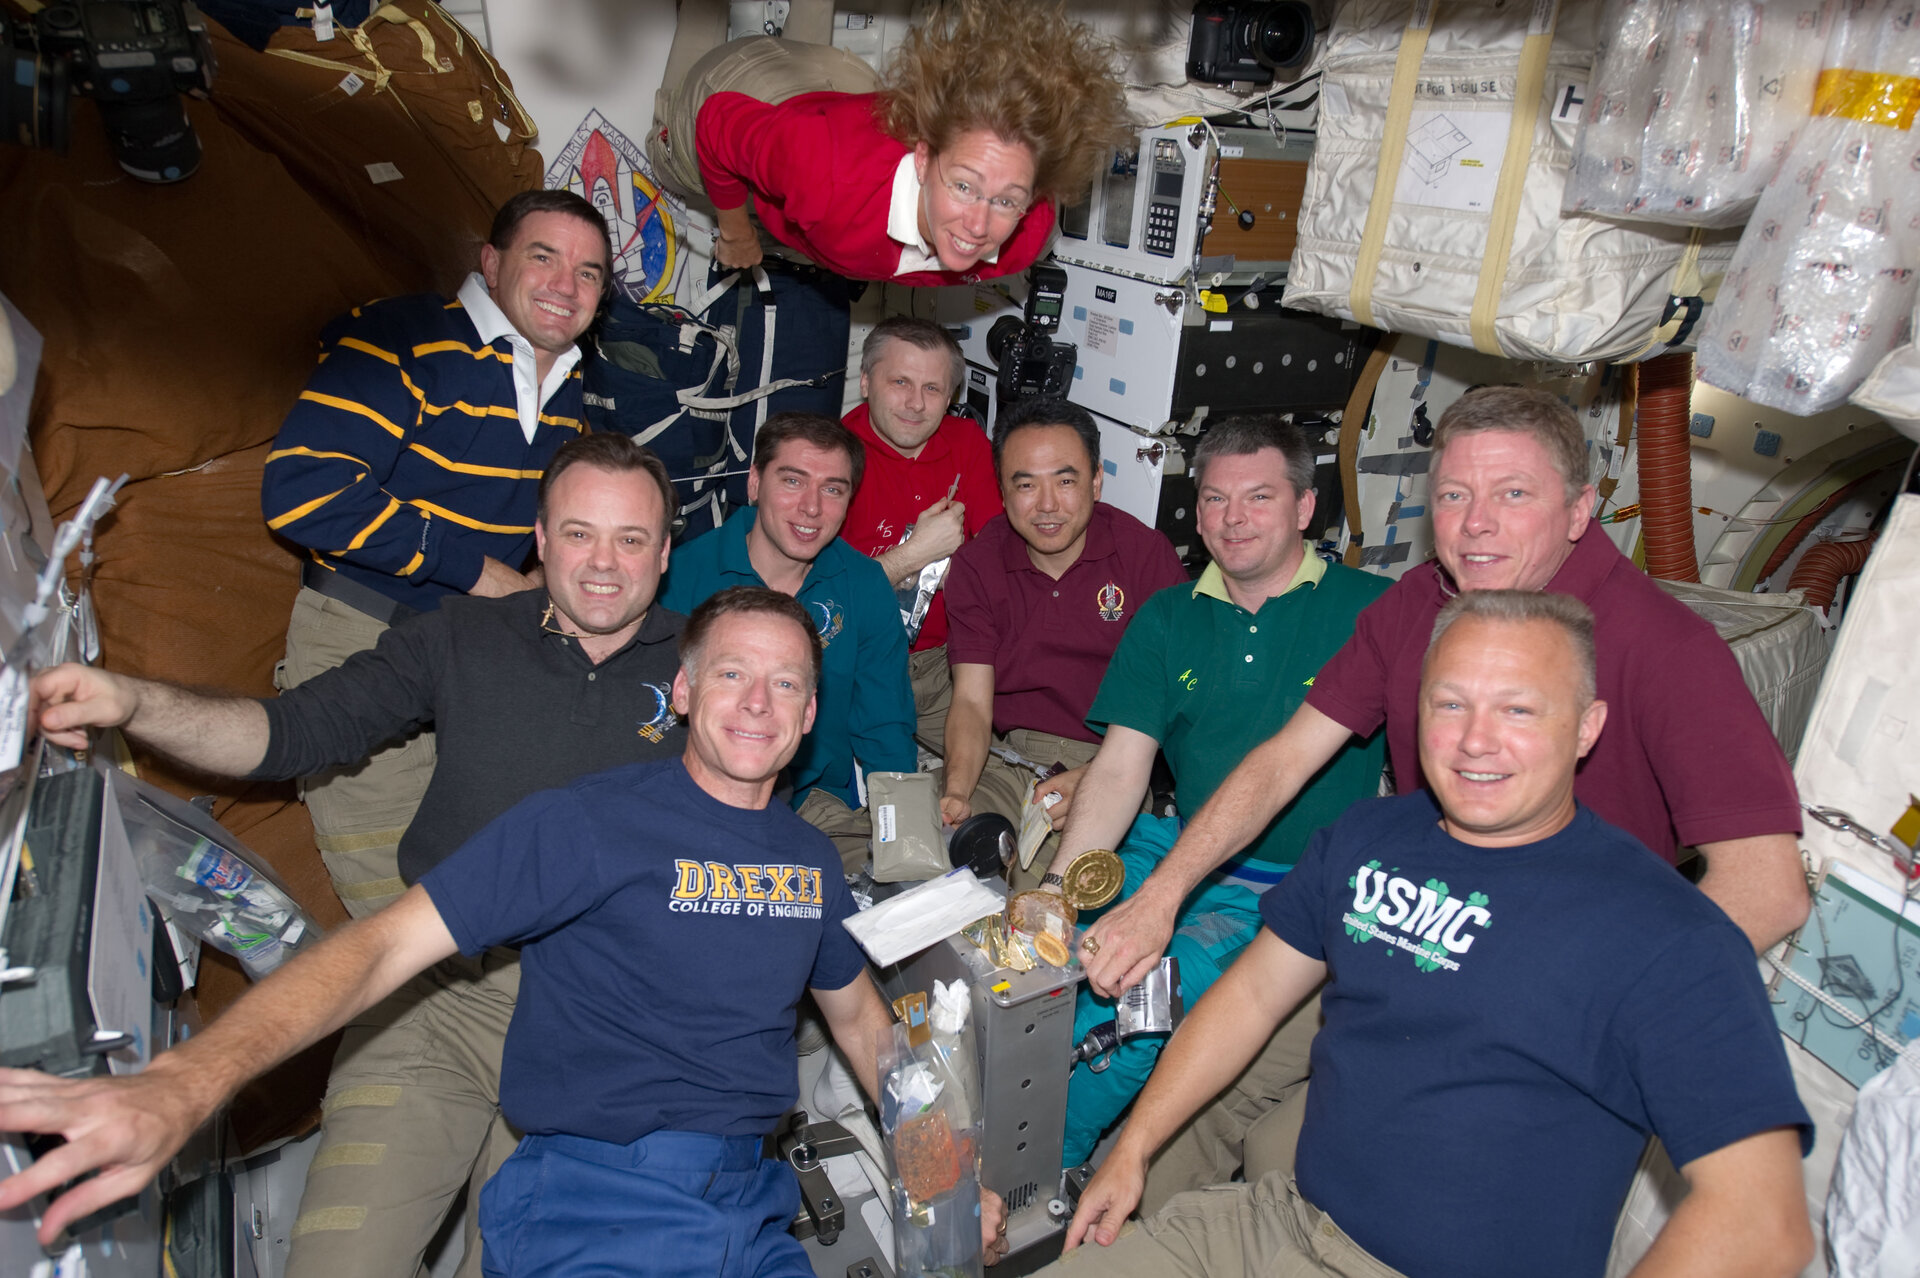 'The All-American Meal' aboard the ISS